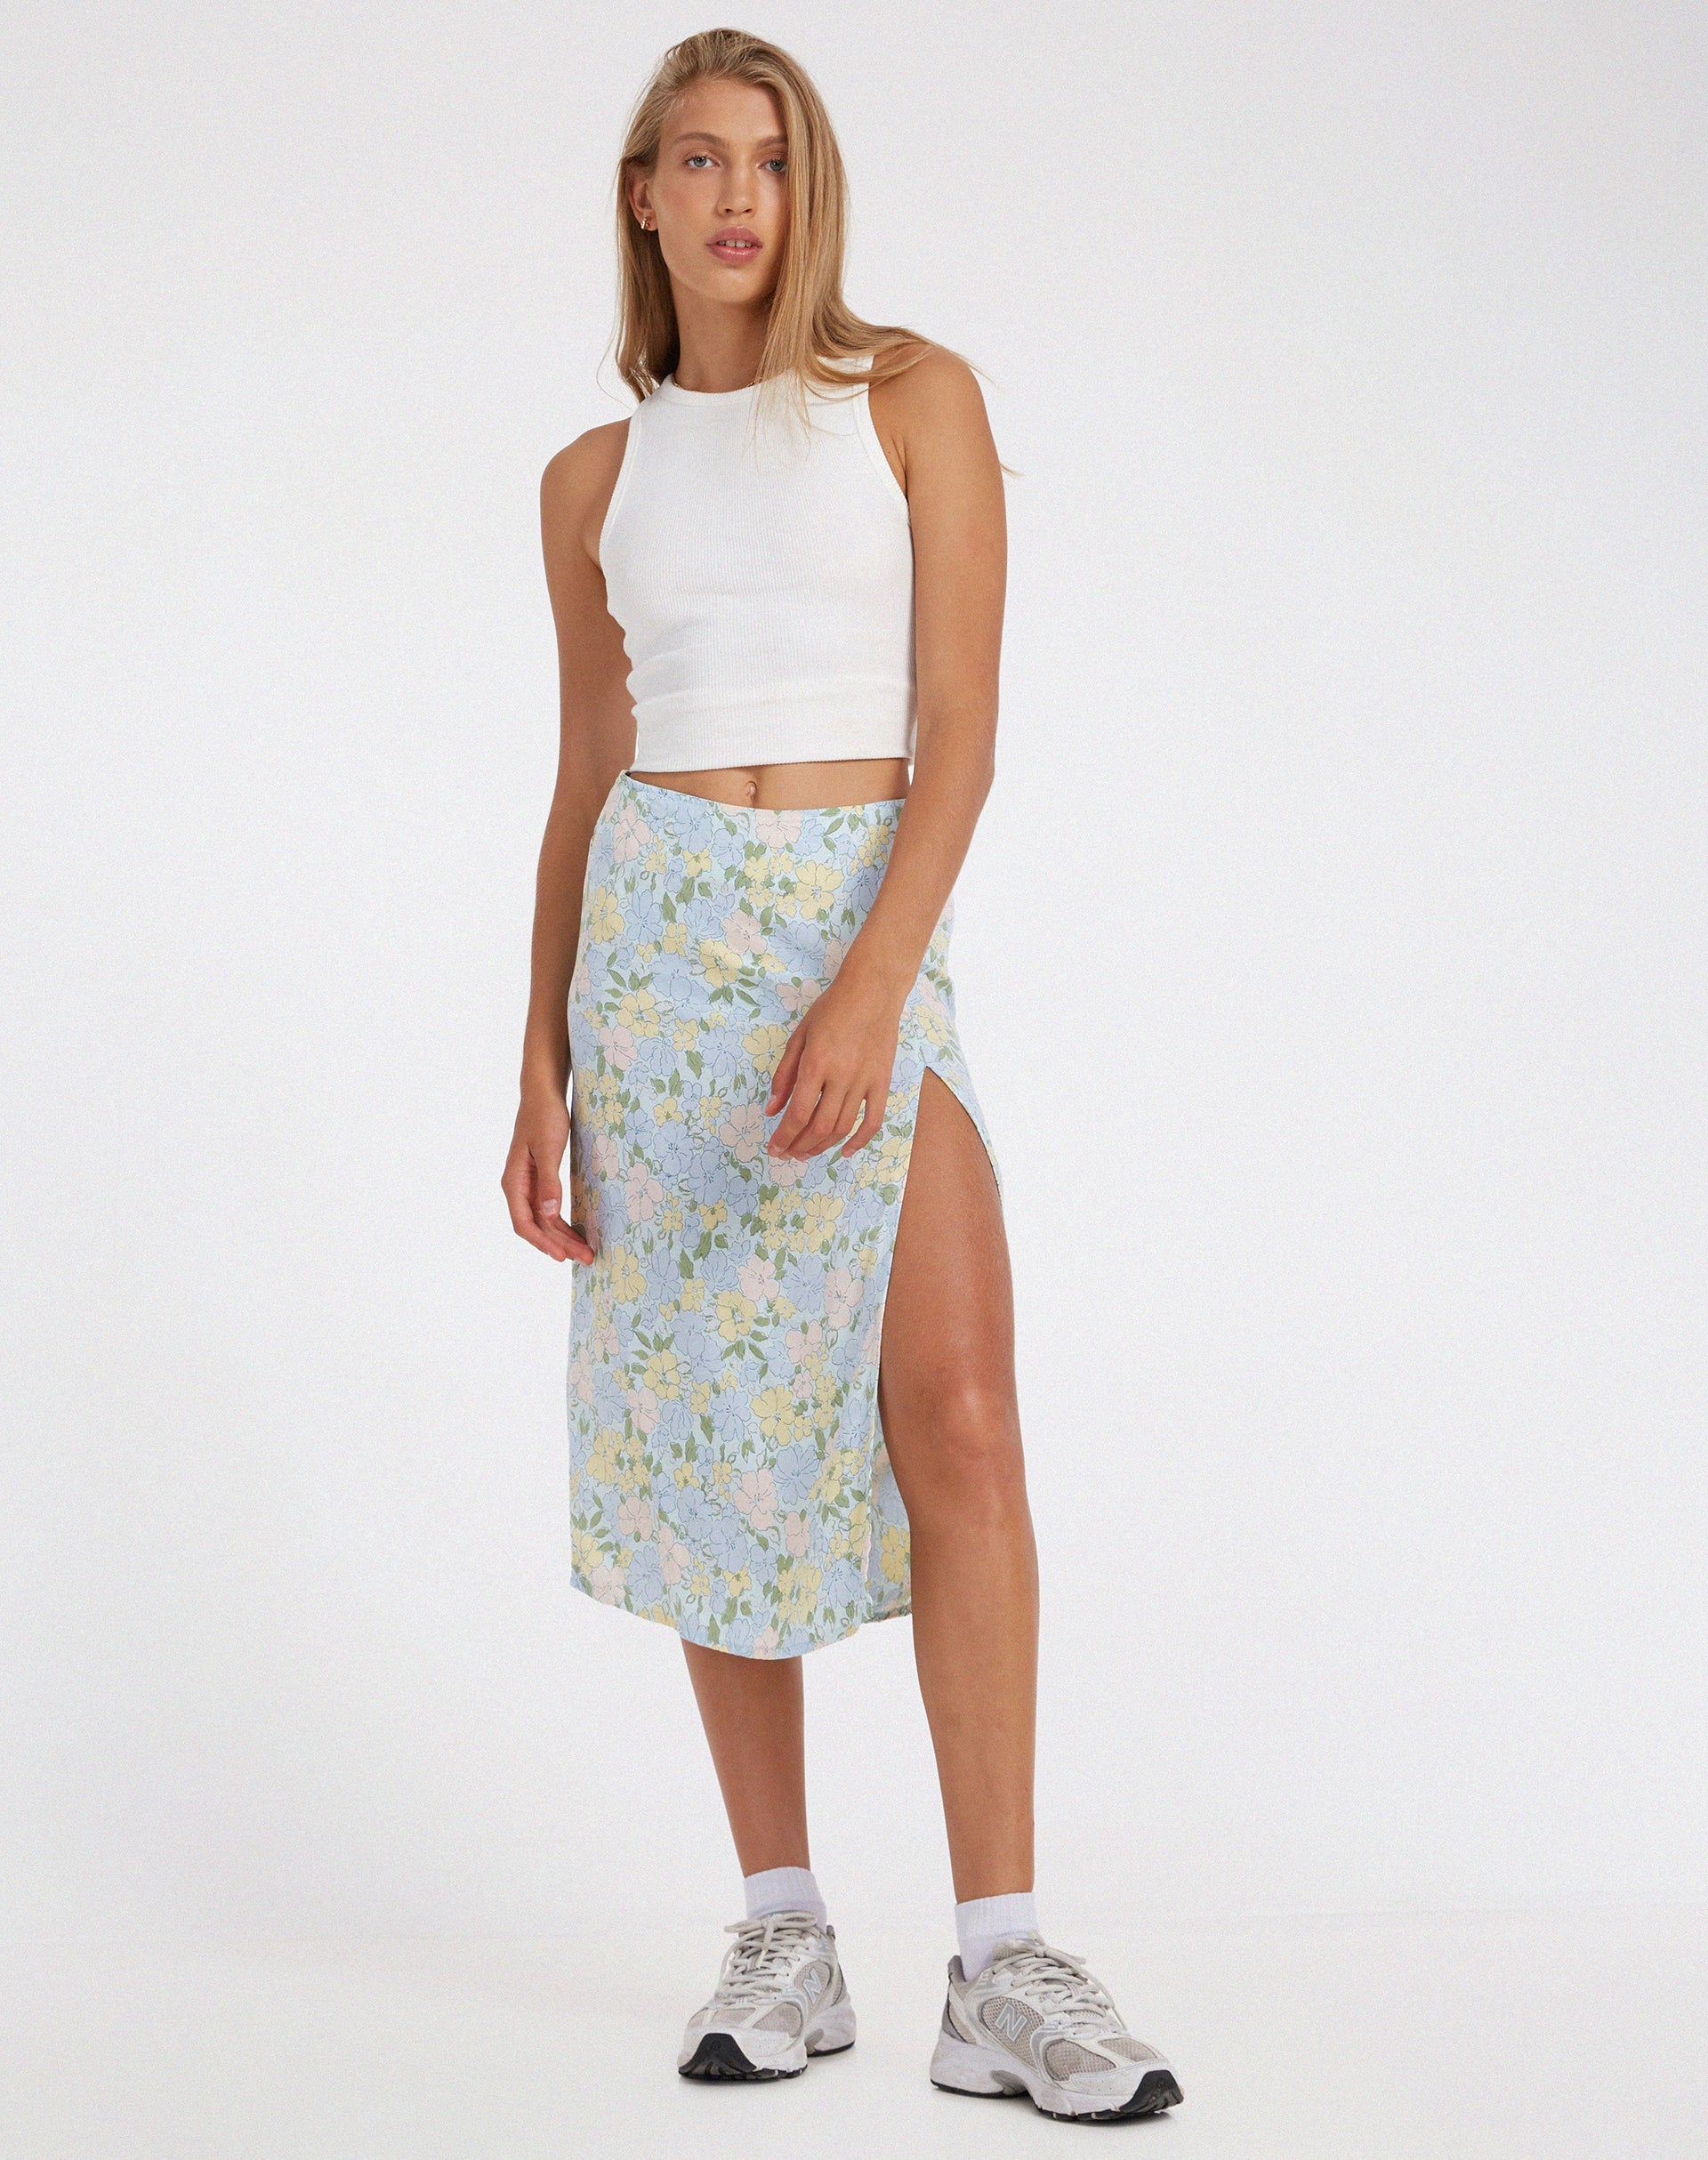 Seko Midi Skirt in Washed Out Pastel Floral